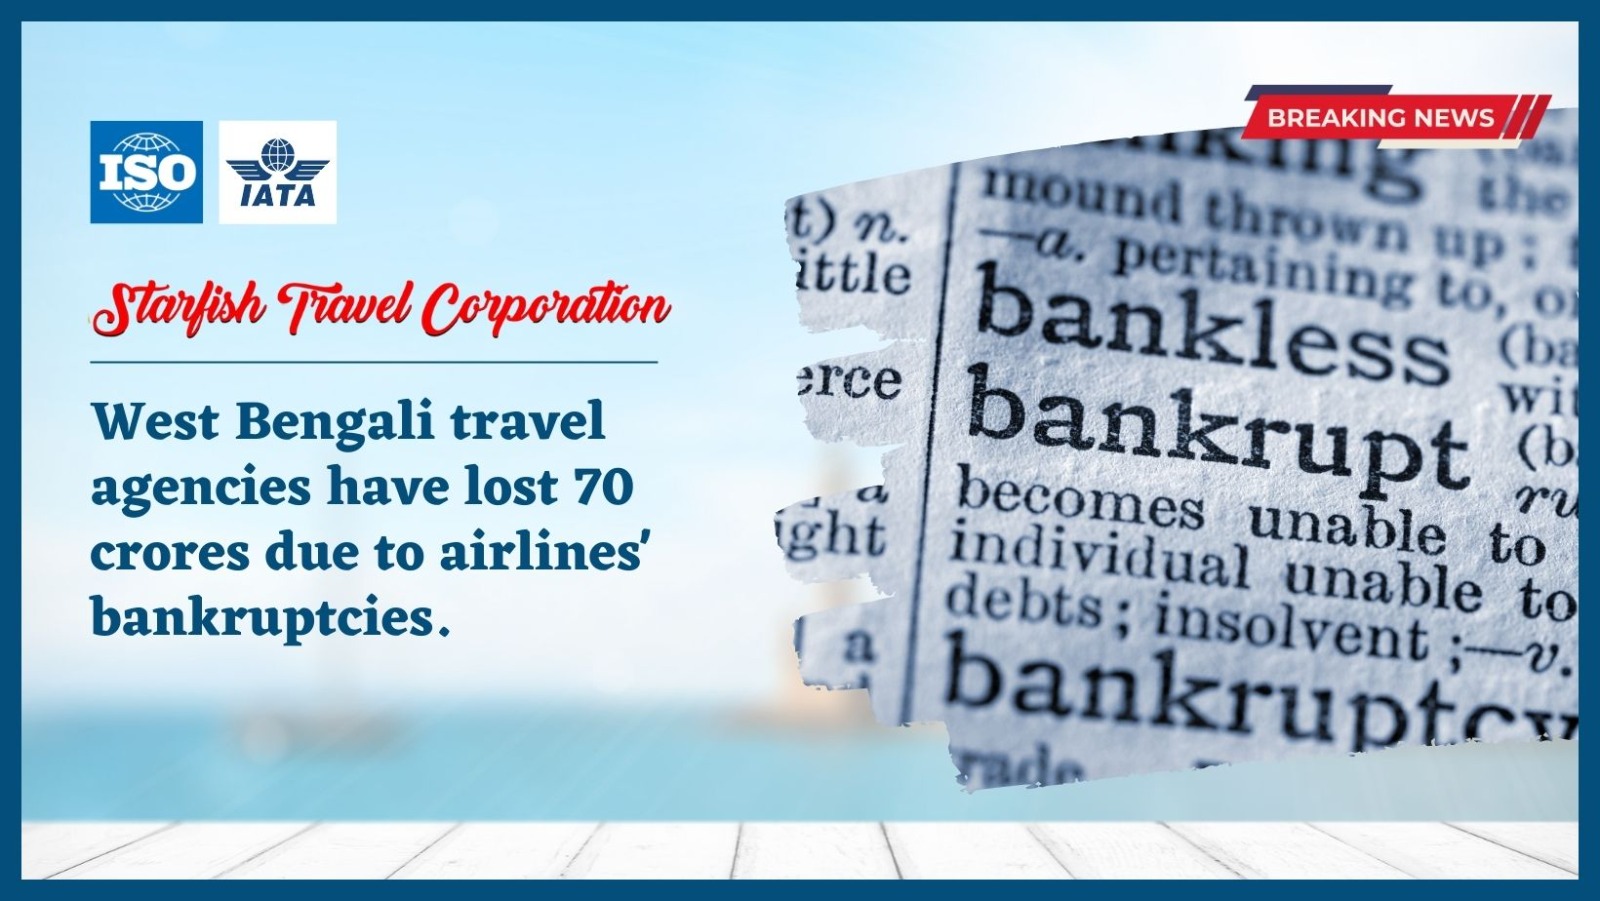 West Bengali travel agencies have lost 70 crores due to airlines' bankruptcies.